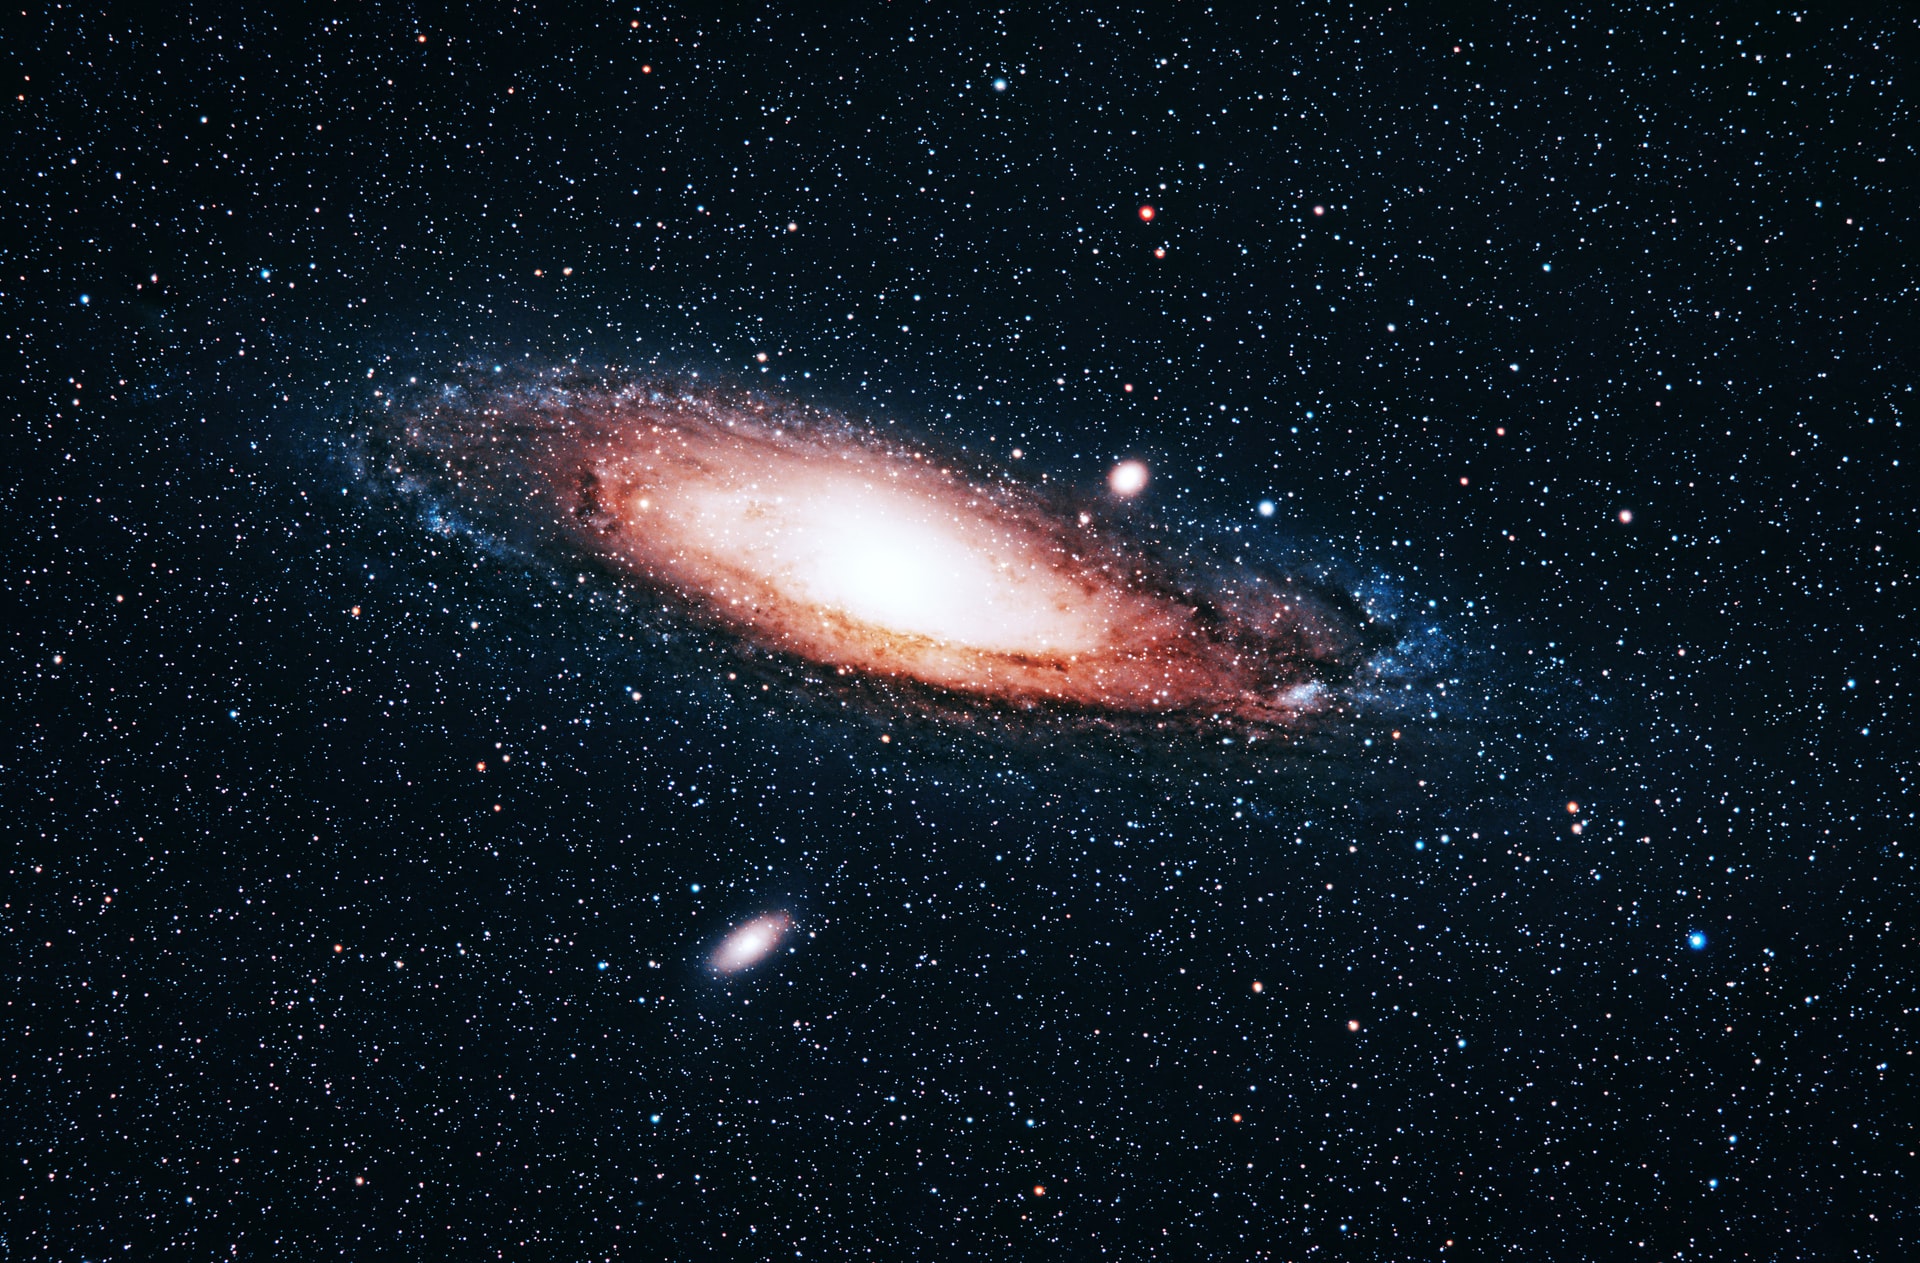 Andromeda galaxy on a dark sky surrounded by thousands of stars sparking the sky.